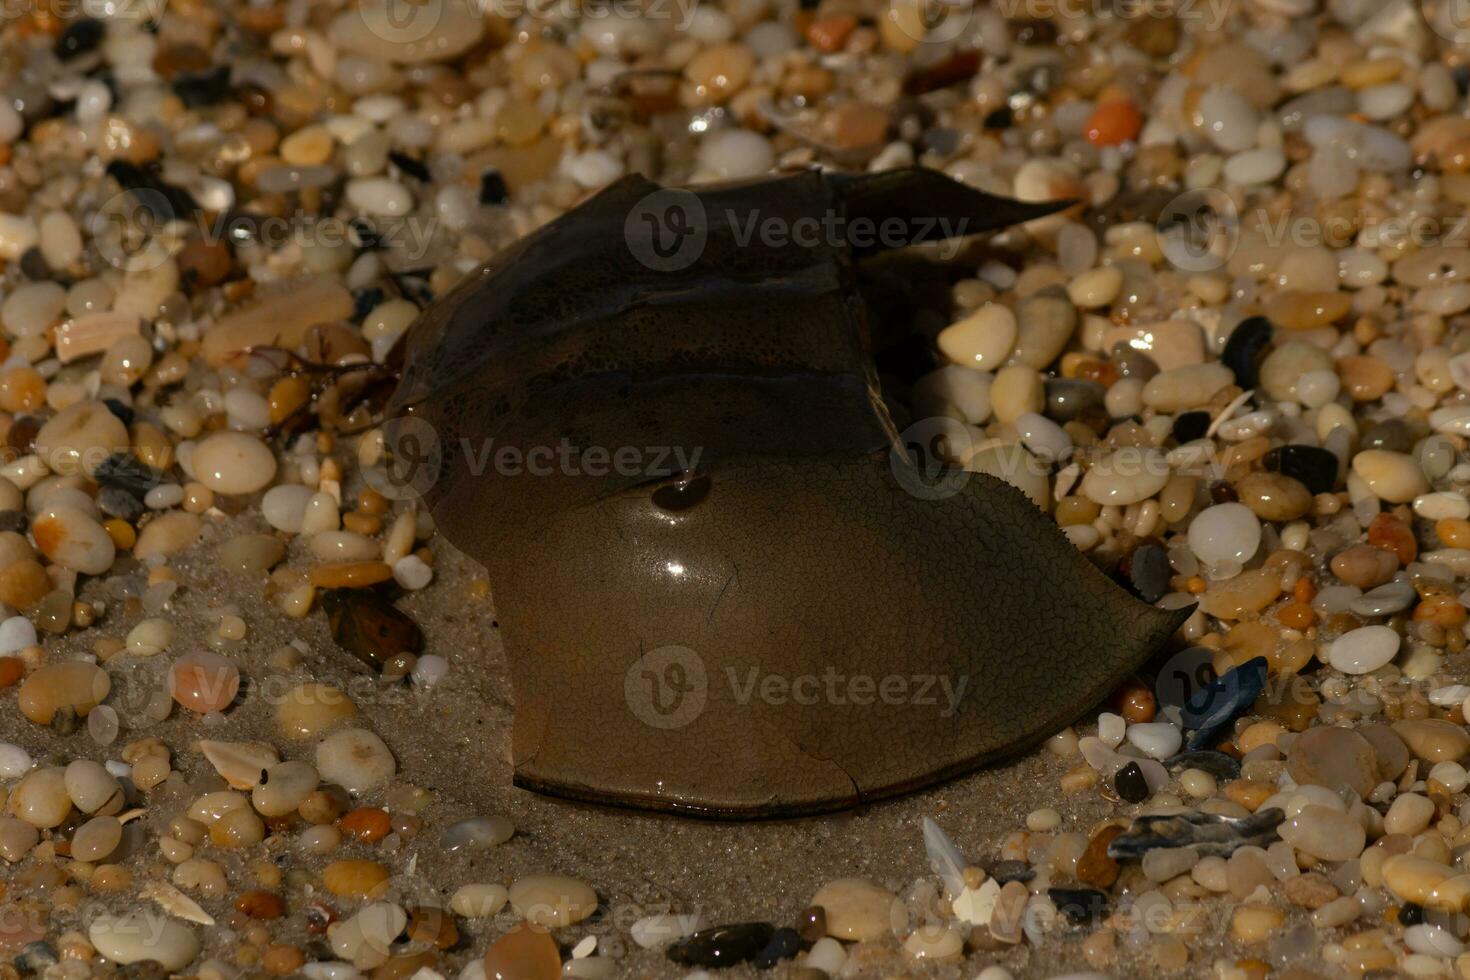 This piece of horseshoe crab shell is sitting on the Cape May beach with shiny smooth pebbles all around. photo